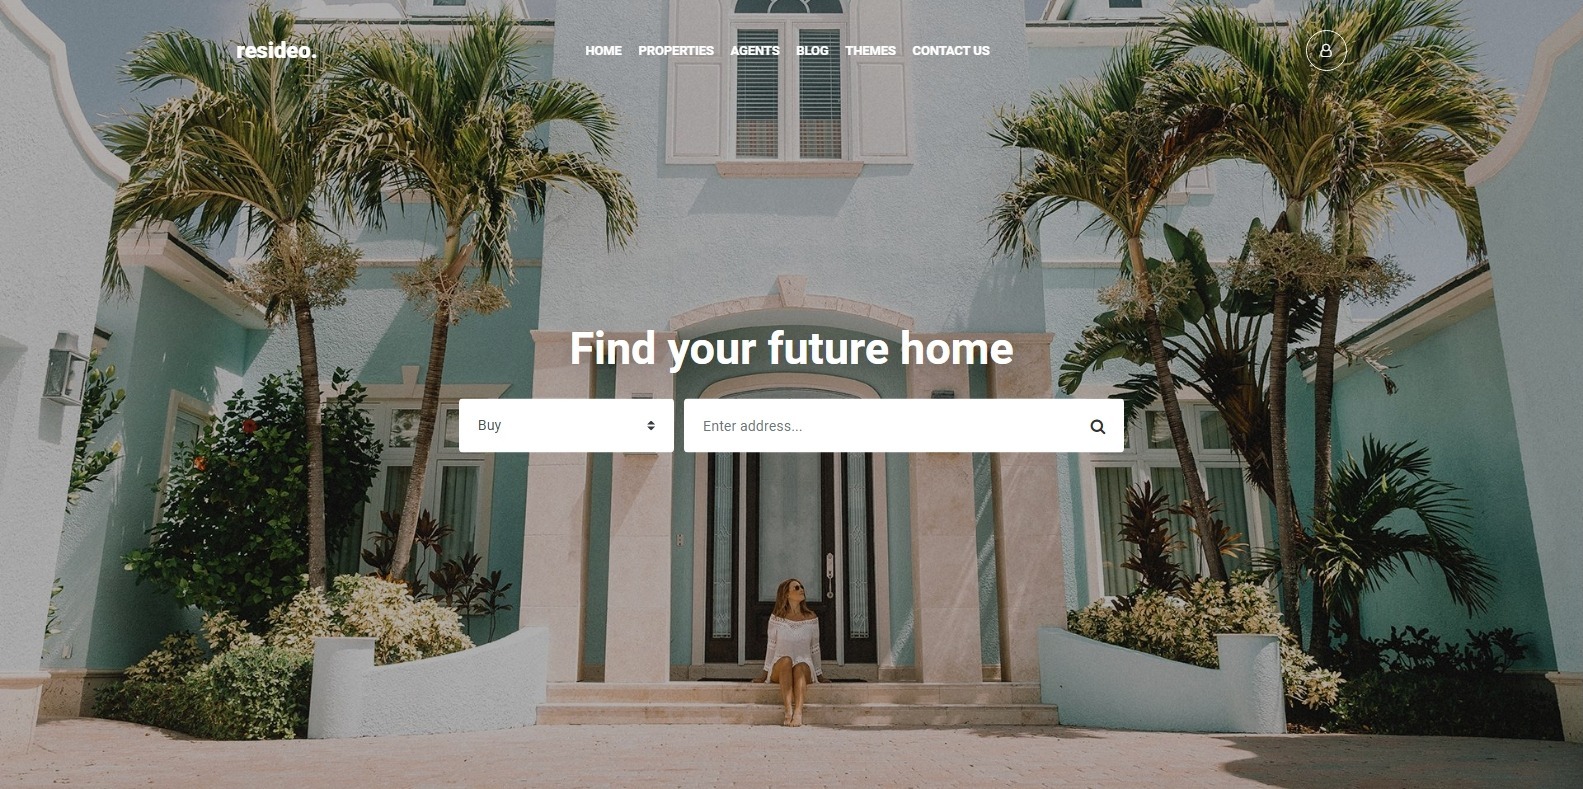 resideo-real-estate-website-template